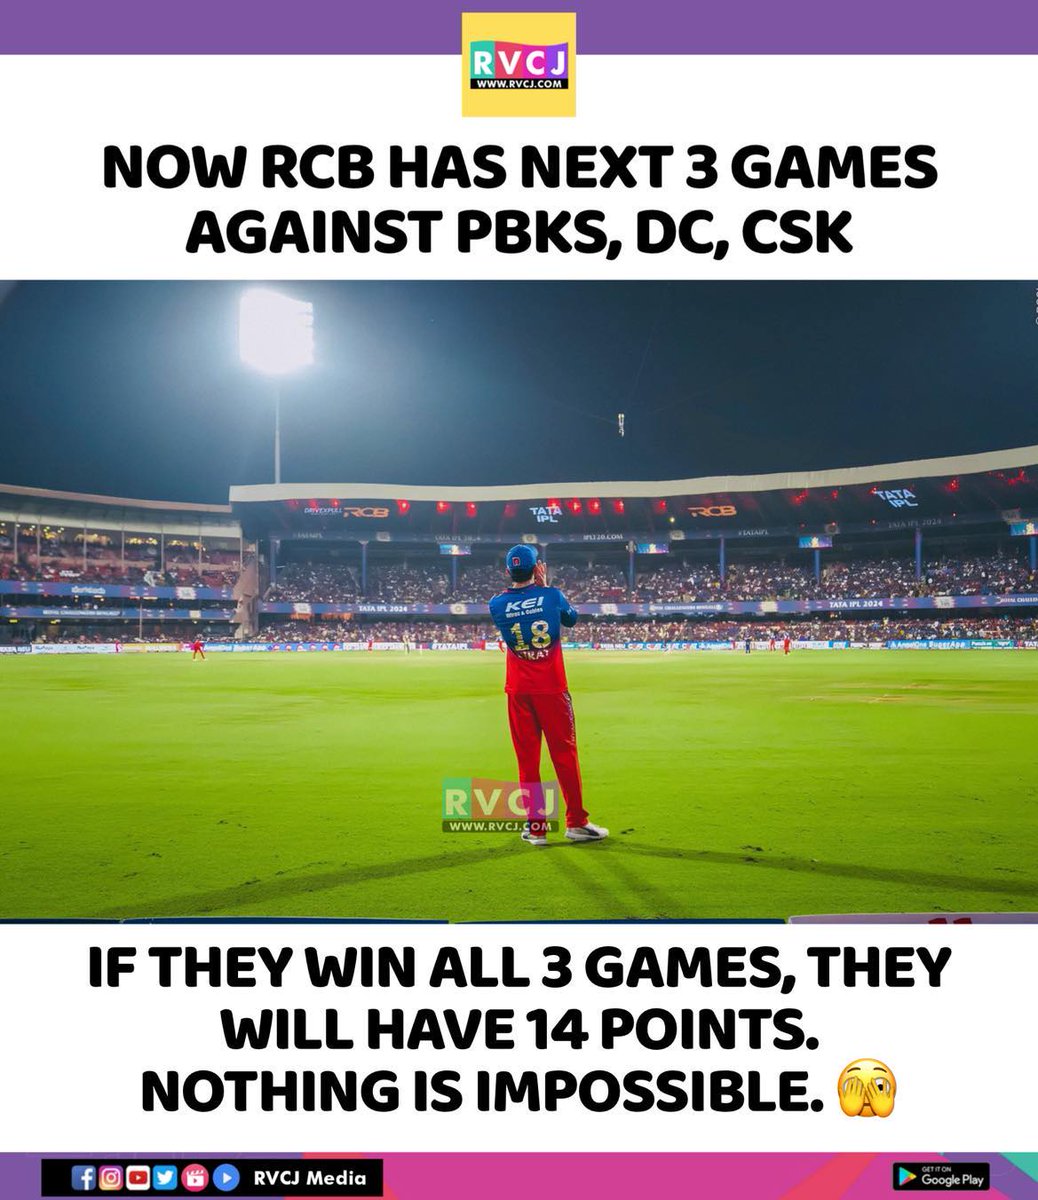 The Next 3 Games of RCB